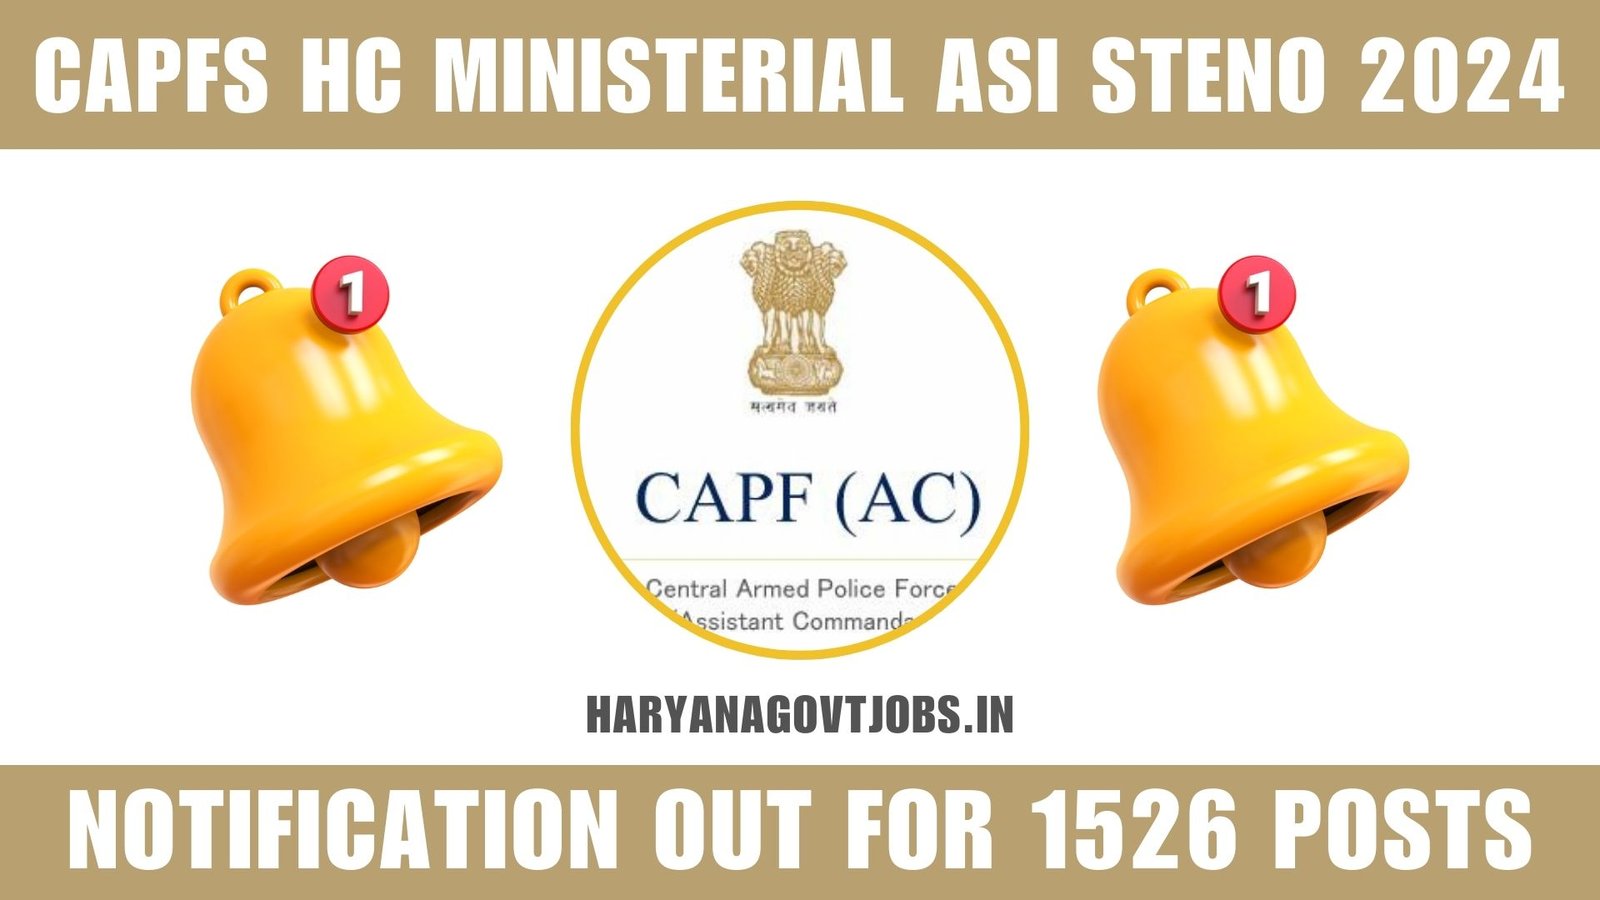 CAPF HC Ministerial and ASI Steno Recruitment 2024 Overview